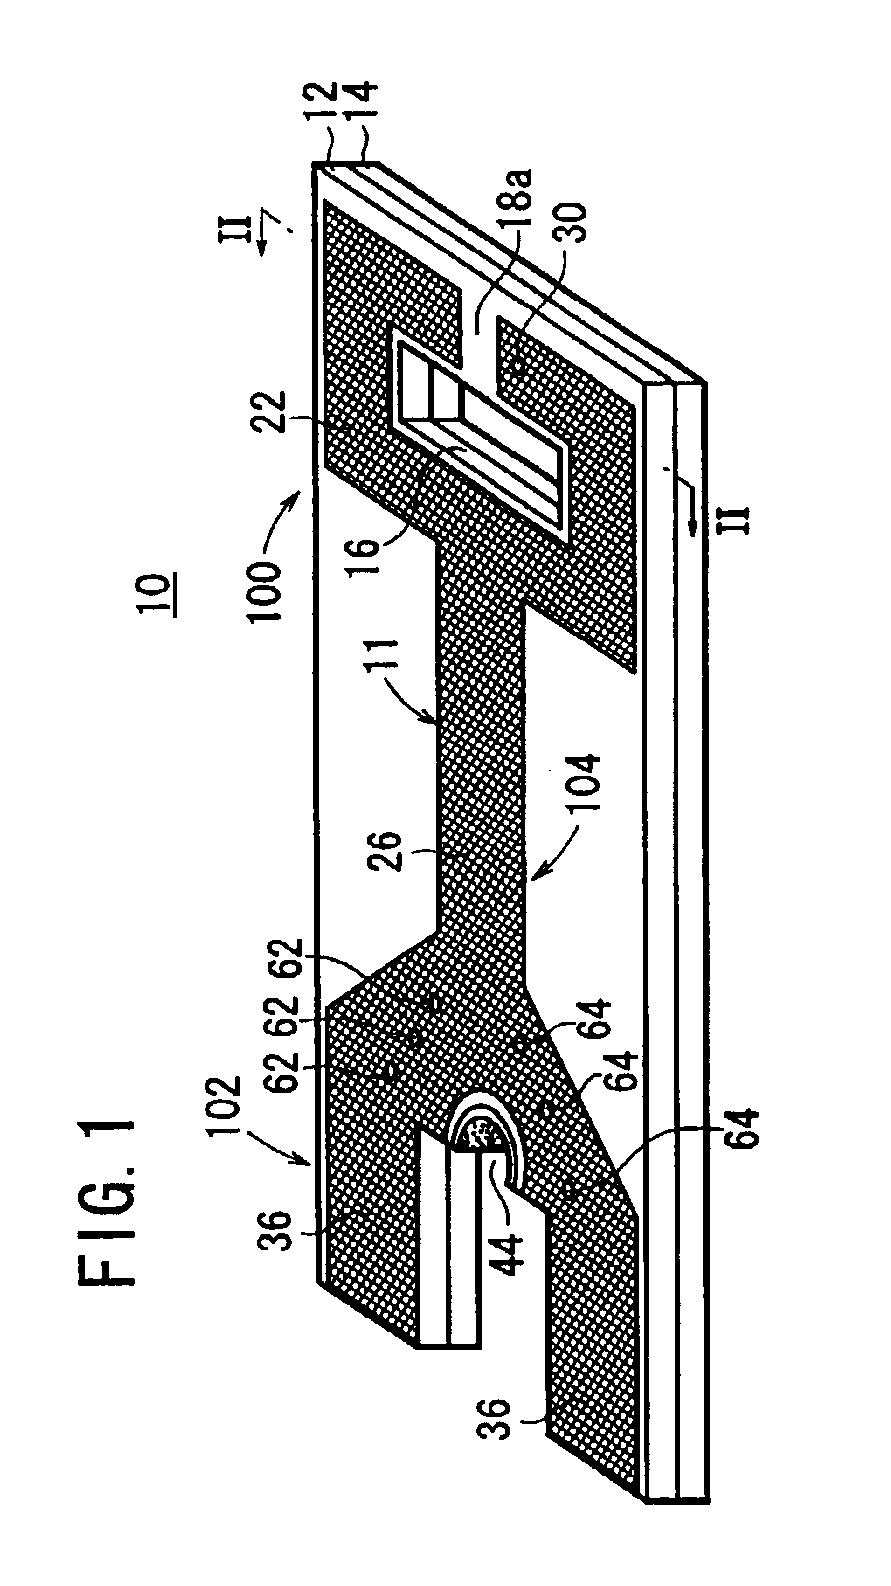 Magnetic sensor, side-opened TEM cell, and apparatus using such magnetic sensor and side-opened TEM cell